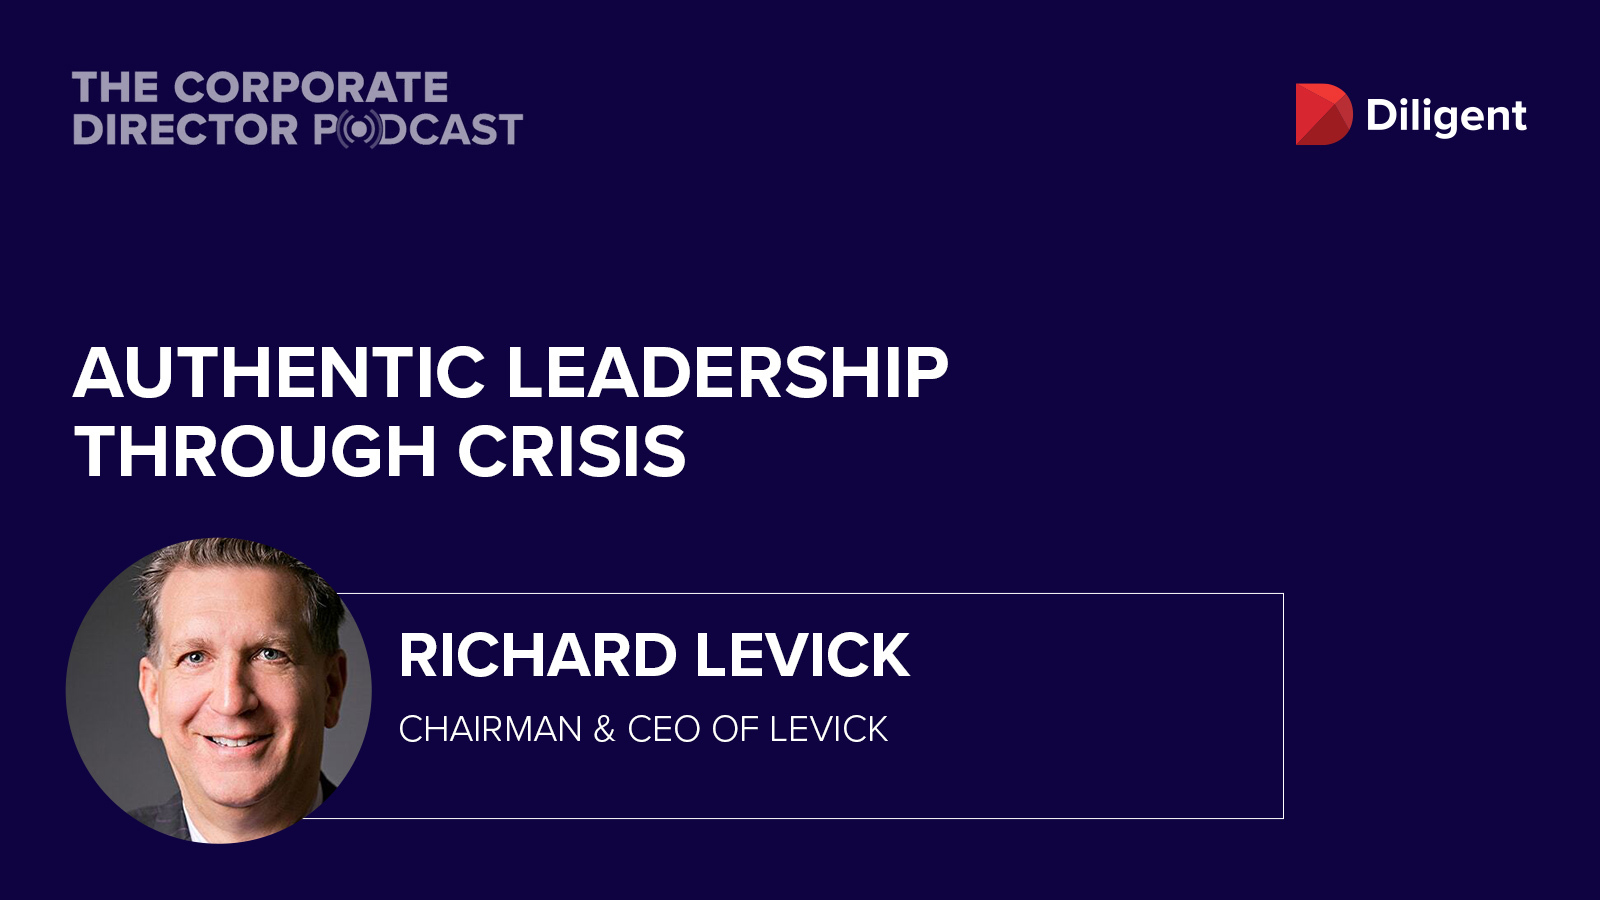 Diligent Corporate Director Podcast Authentic Leadership Through Crisis